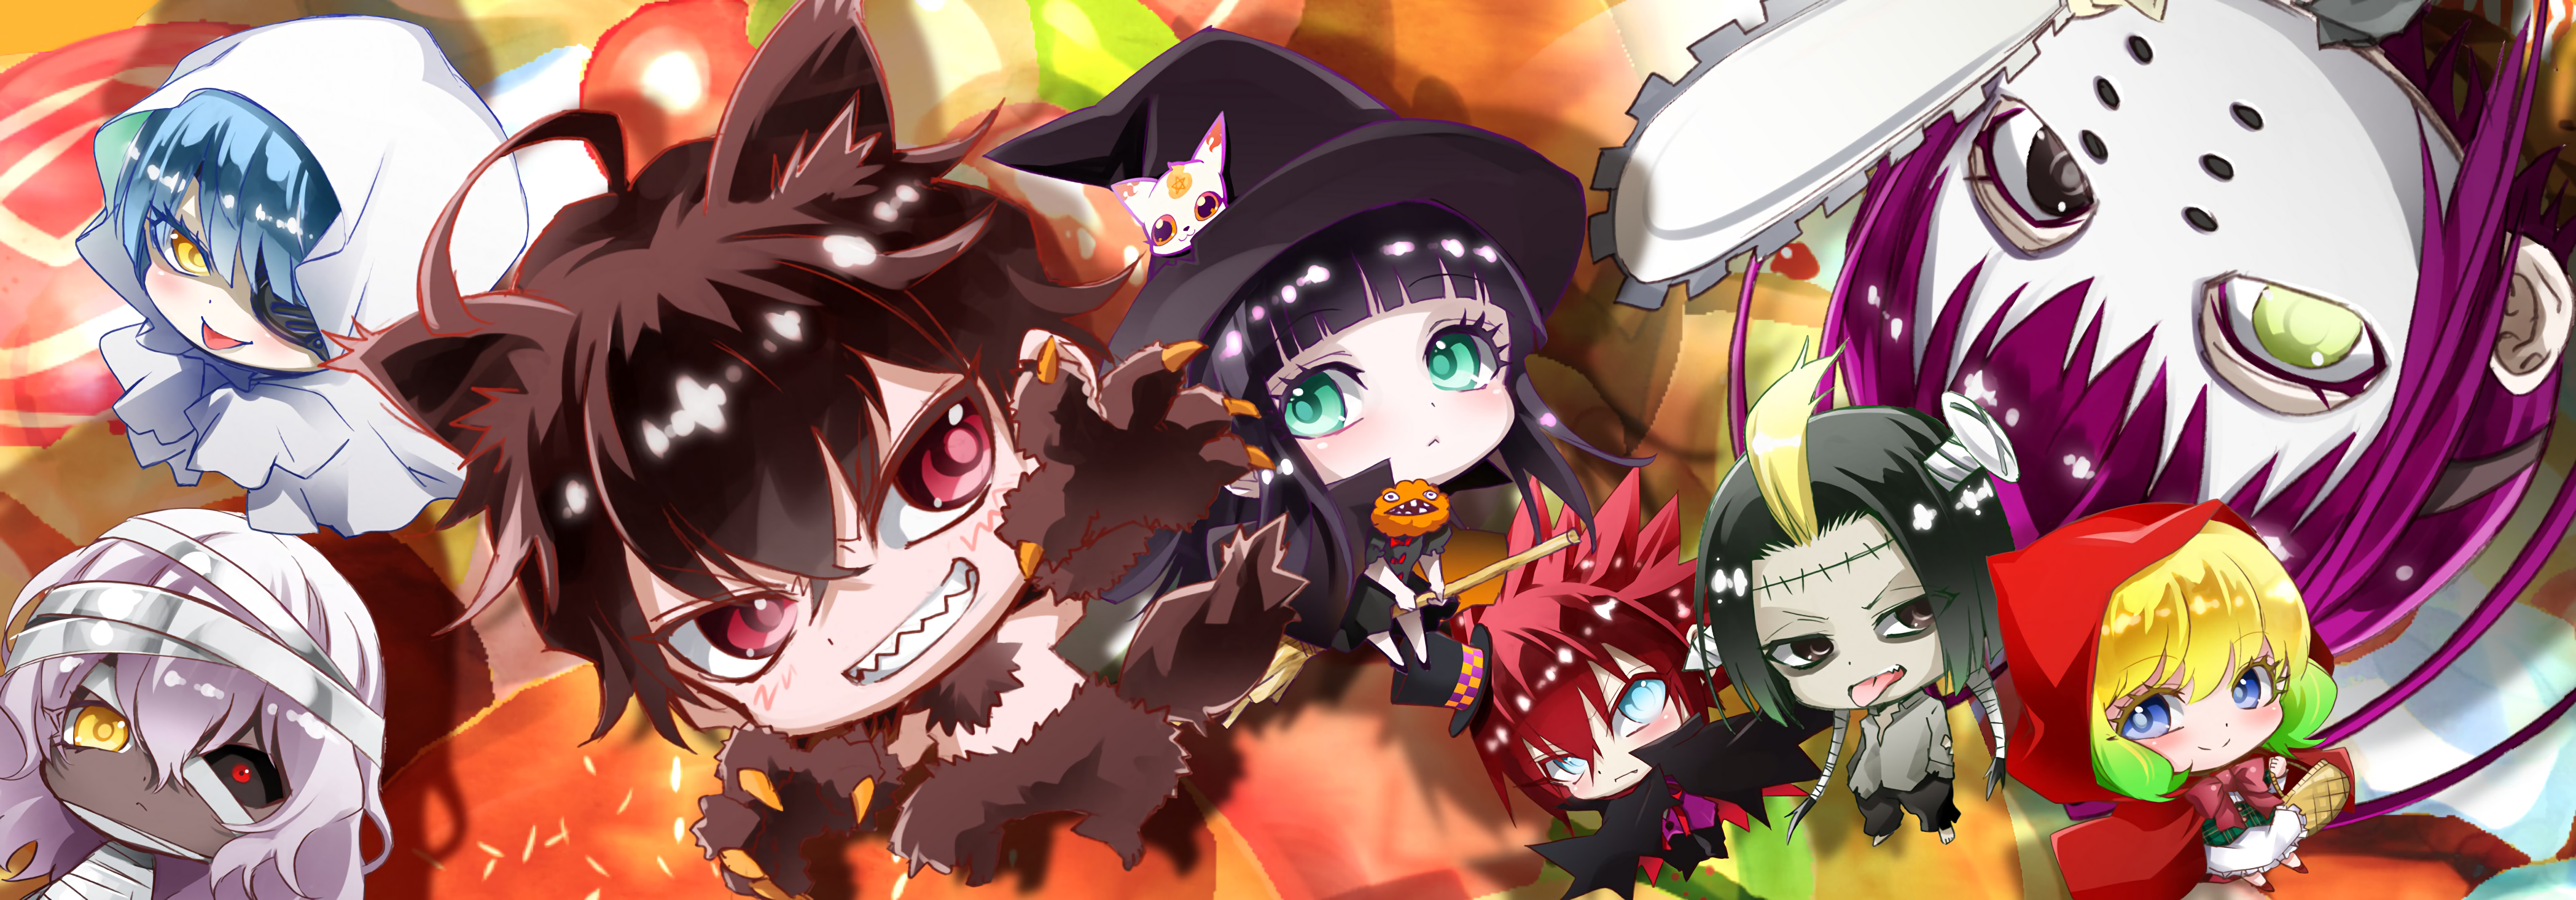 Anime Twin Star Exorcists 4194x1466